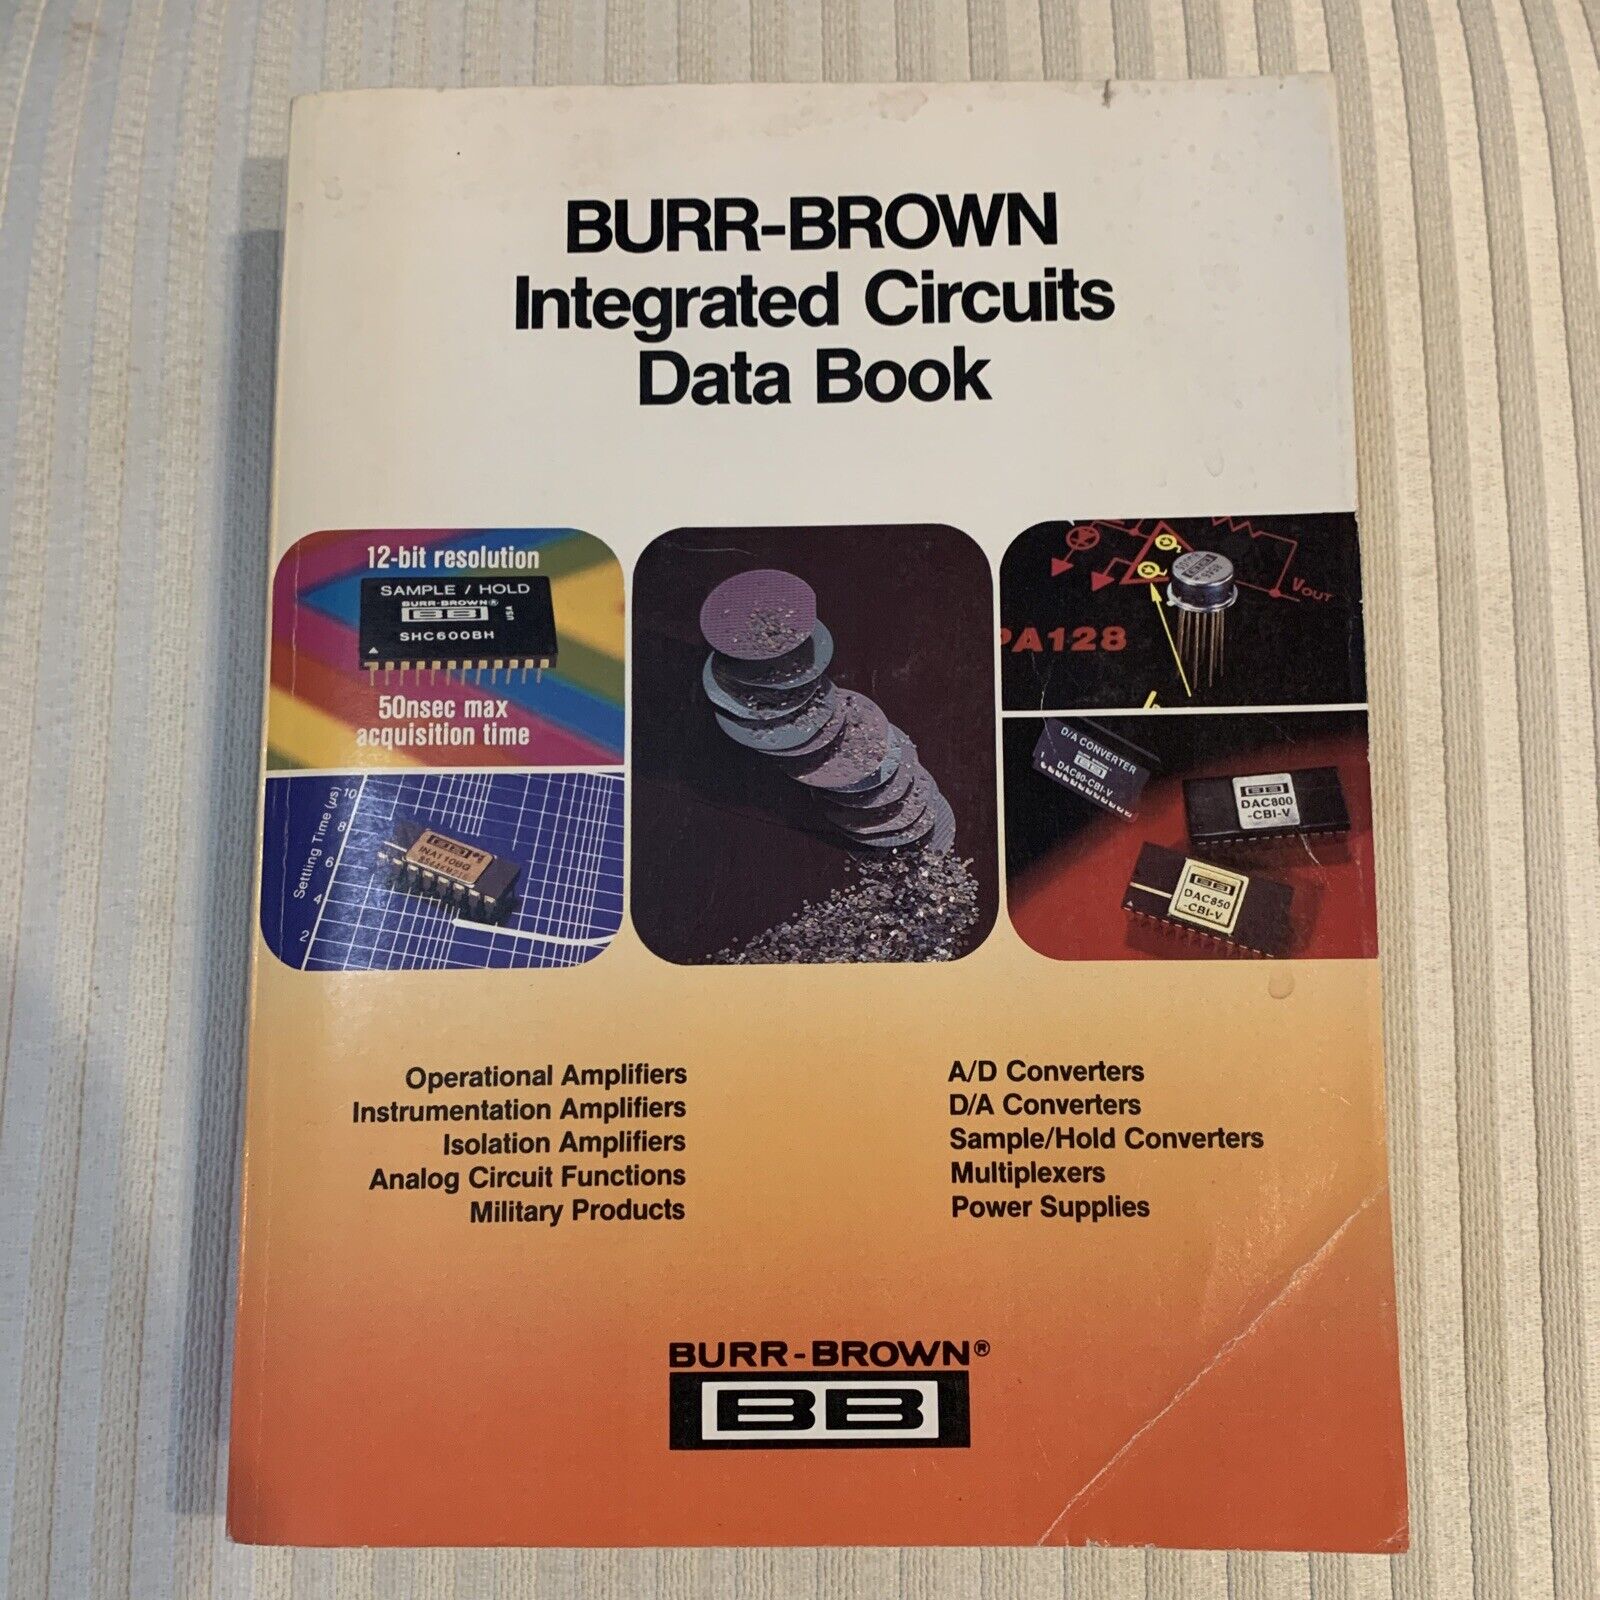 Vtg BURR-BROWN Integrated Circuits Data Book 1986 Softcover Computing Military